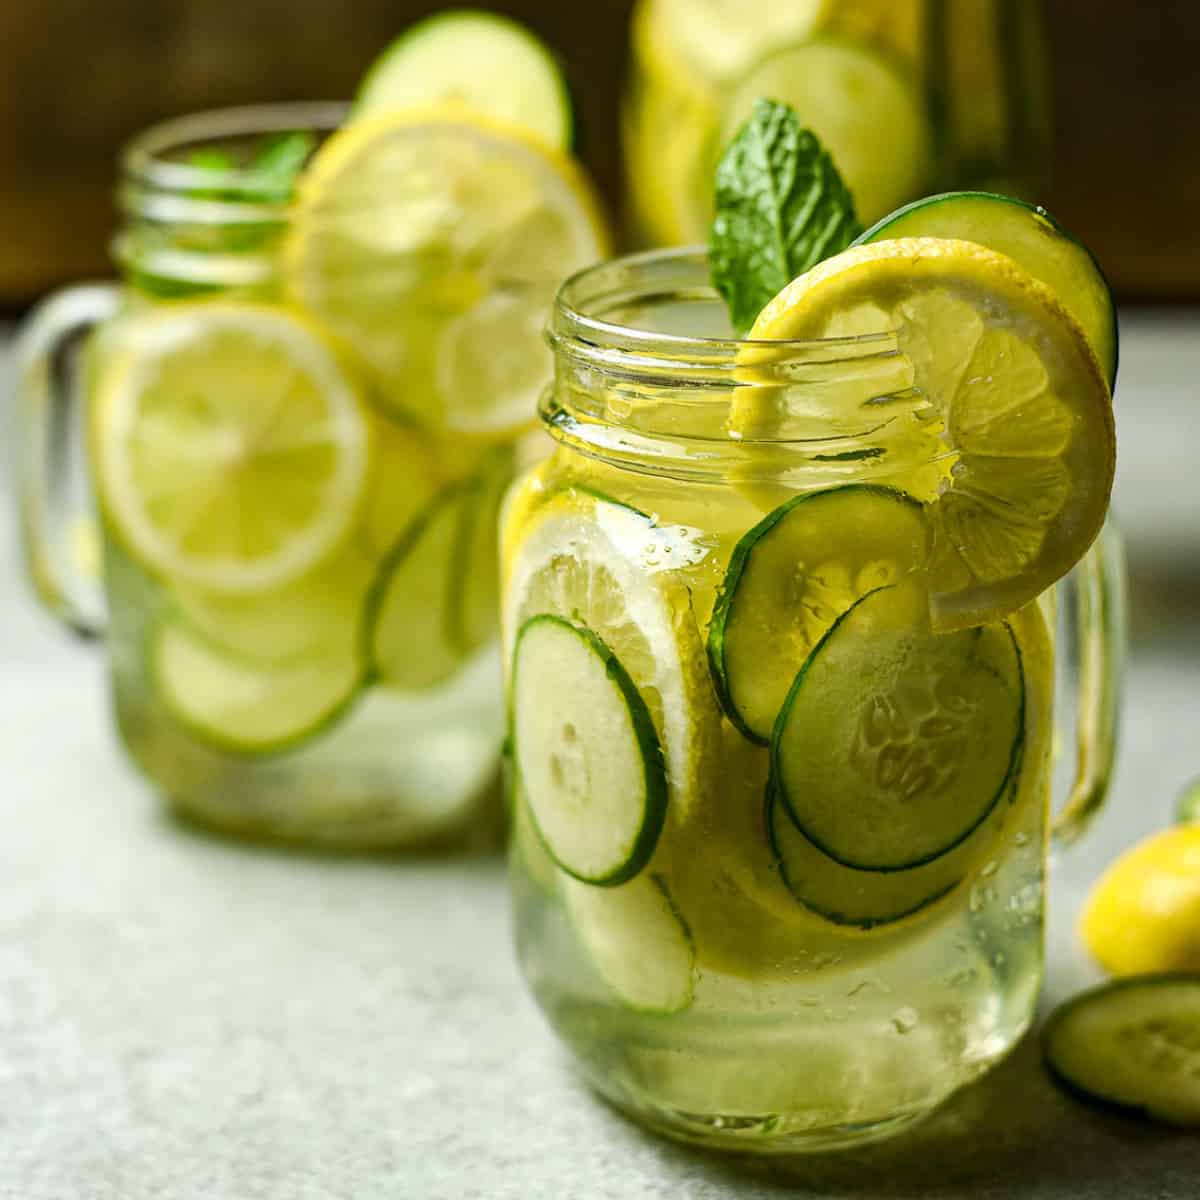 what are the benefits of cucumber and lemon water